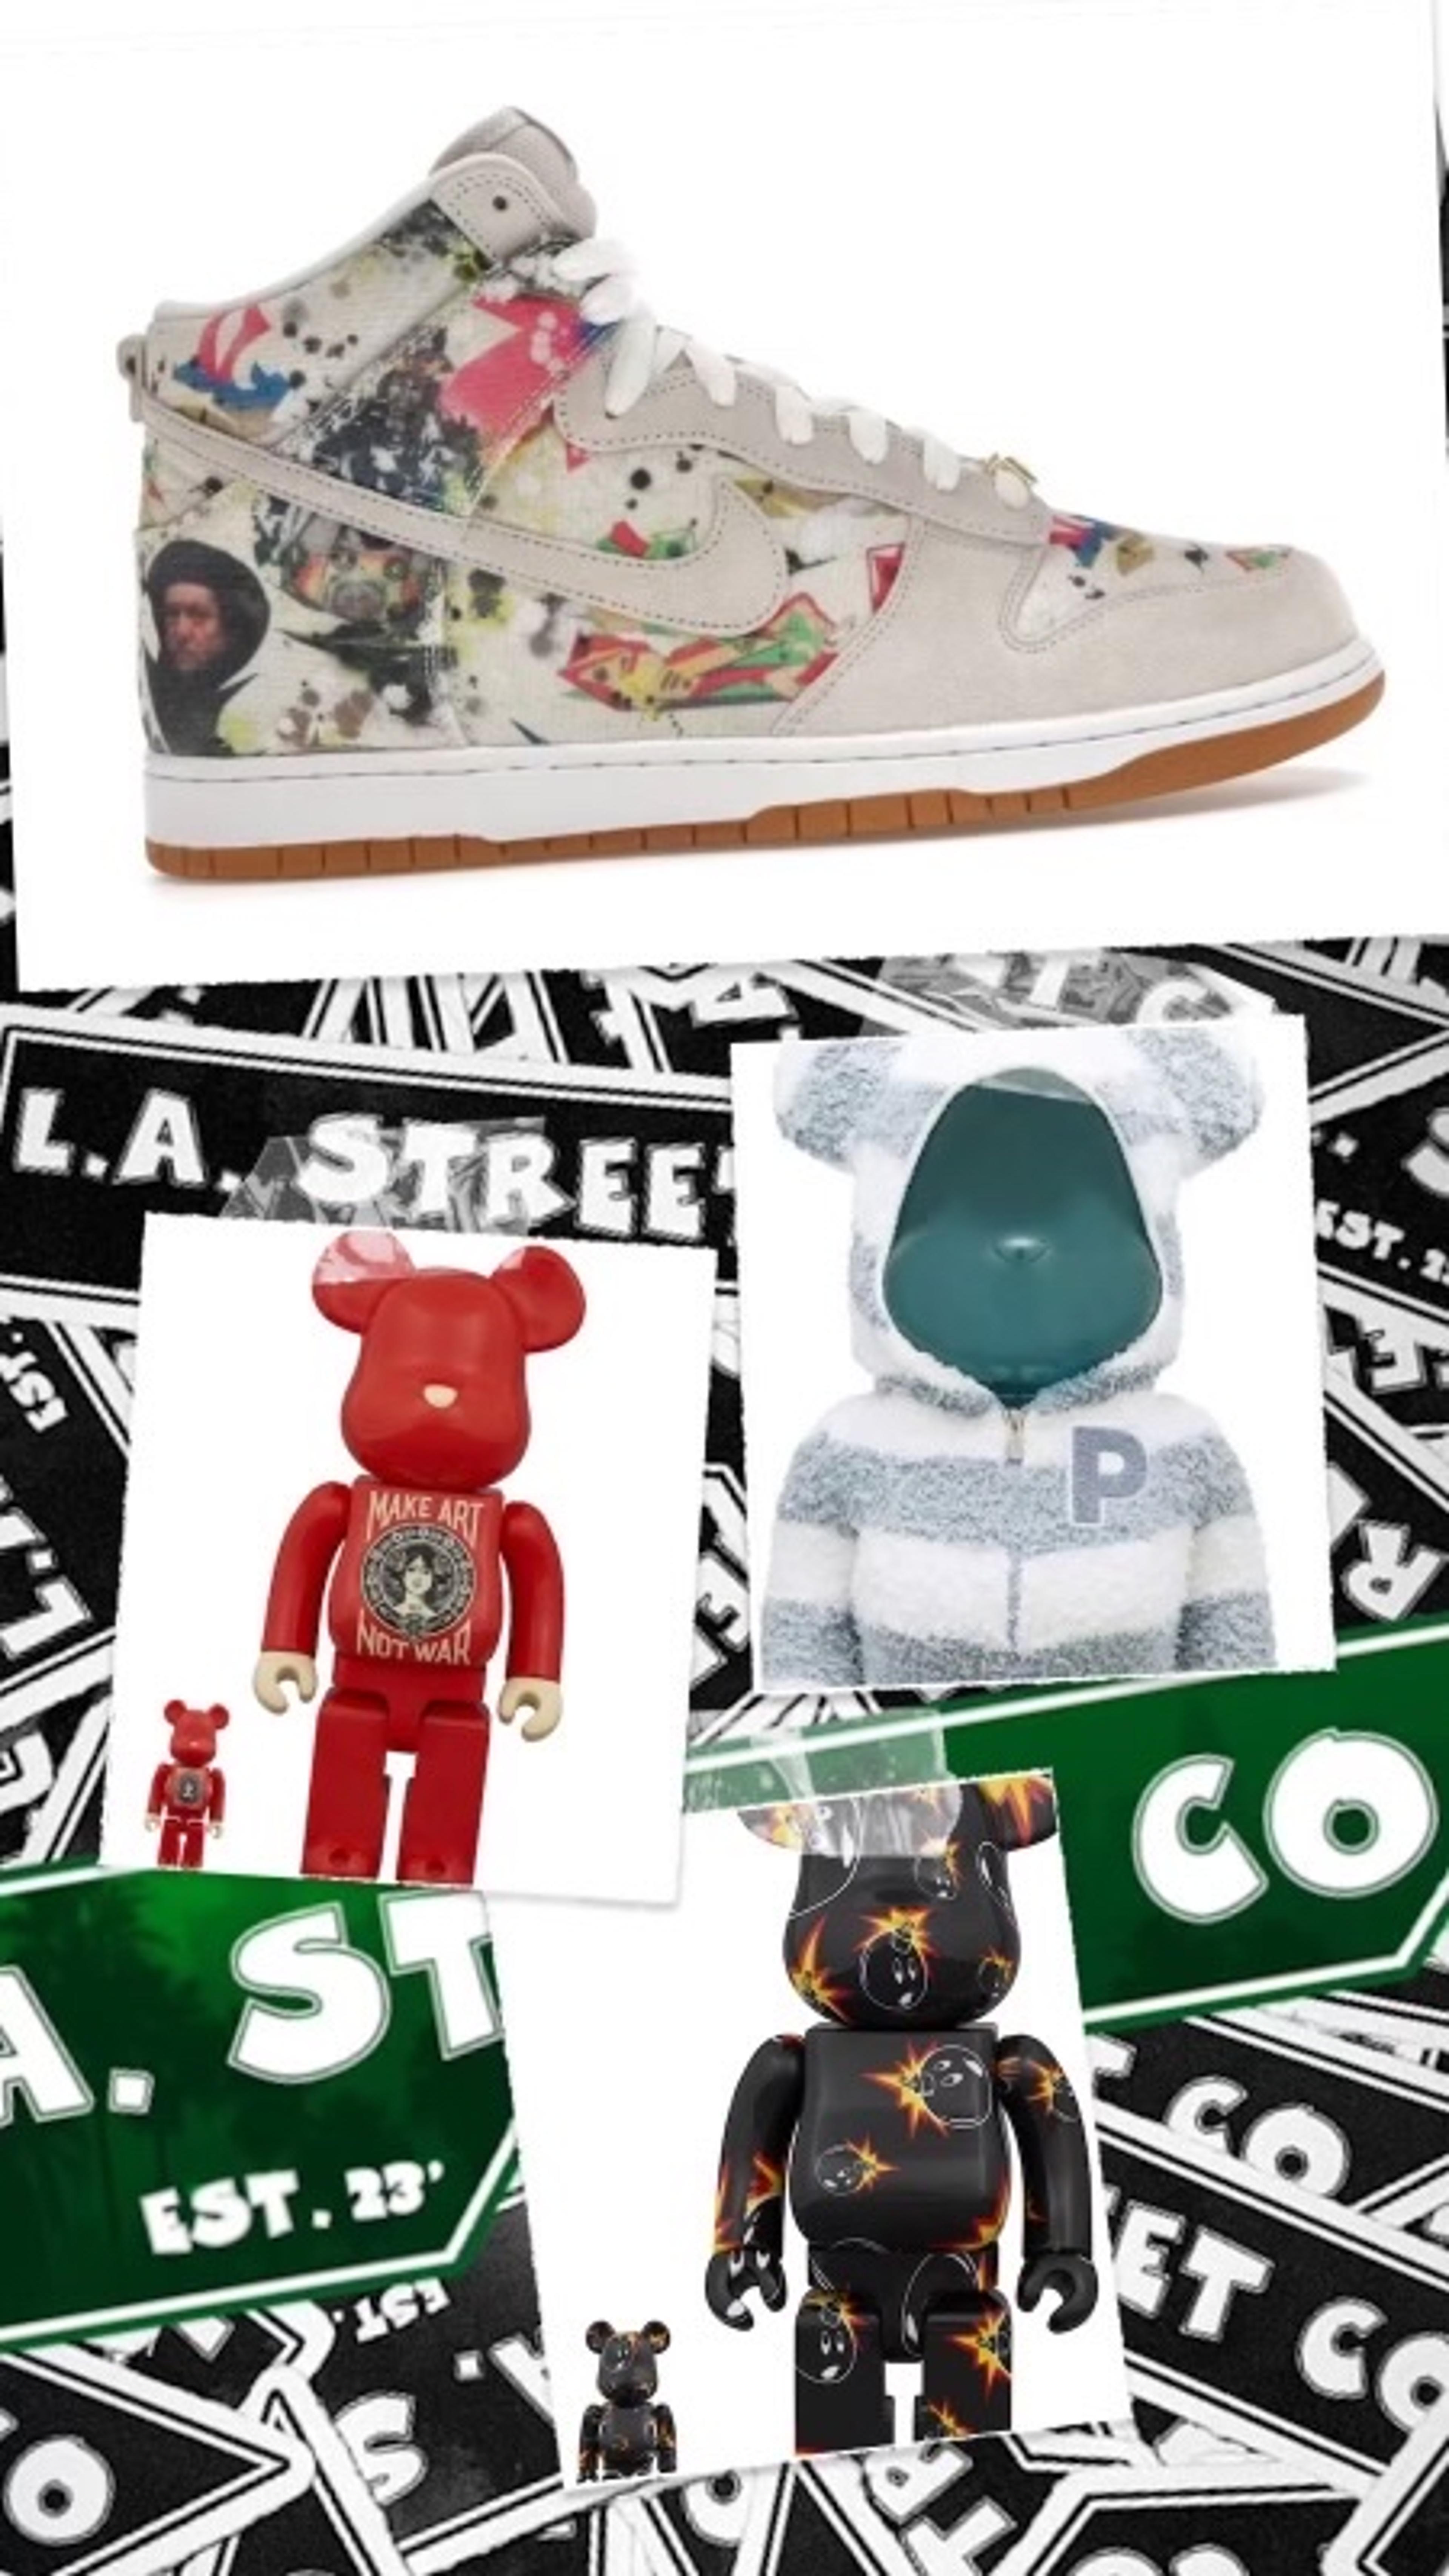 Preview image for the show titled "🔥1000% BE@RBRICK, 400% BE@RBRICKS & More!!!🔥" at May 1, 2024